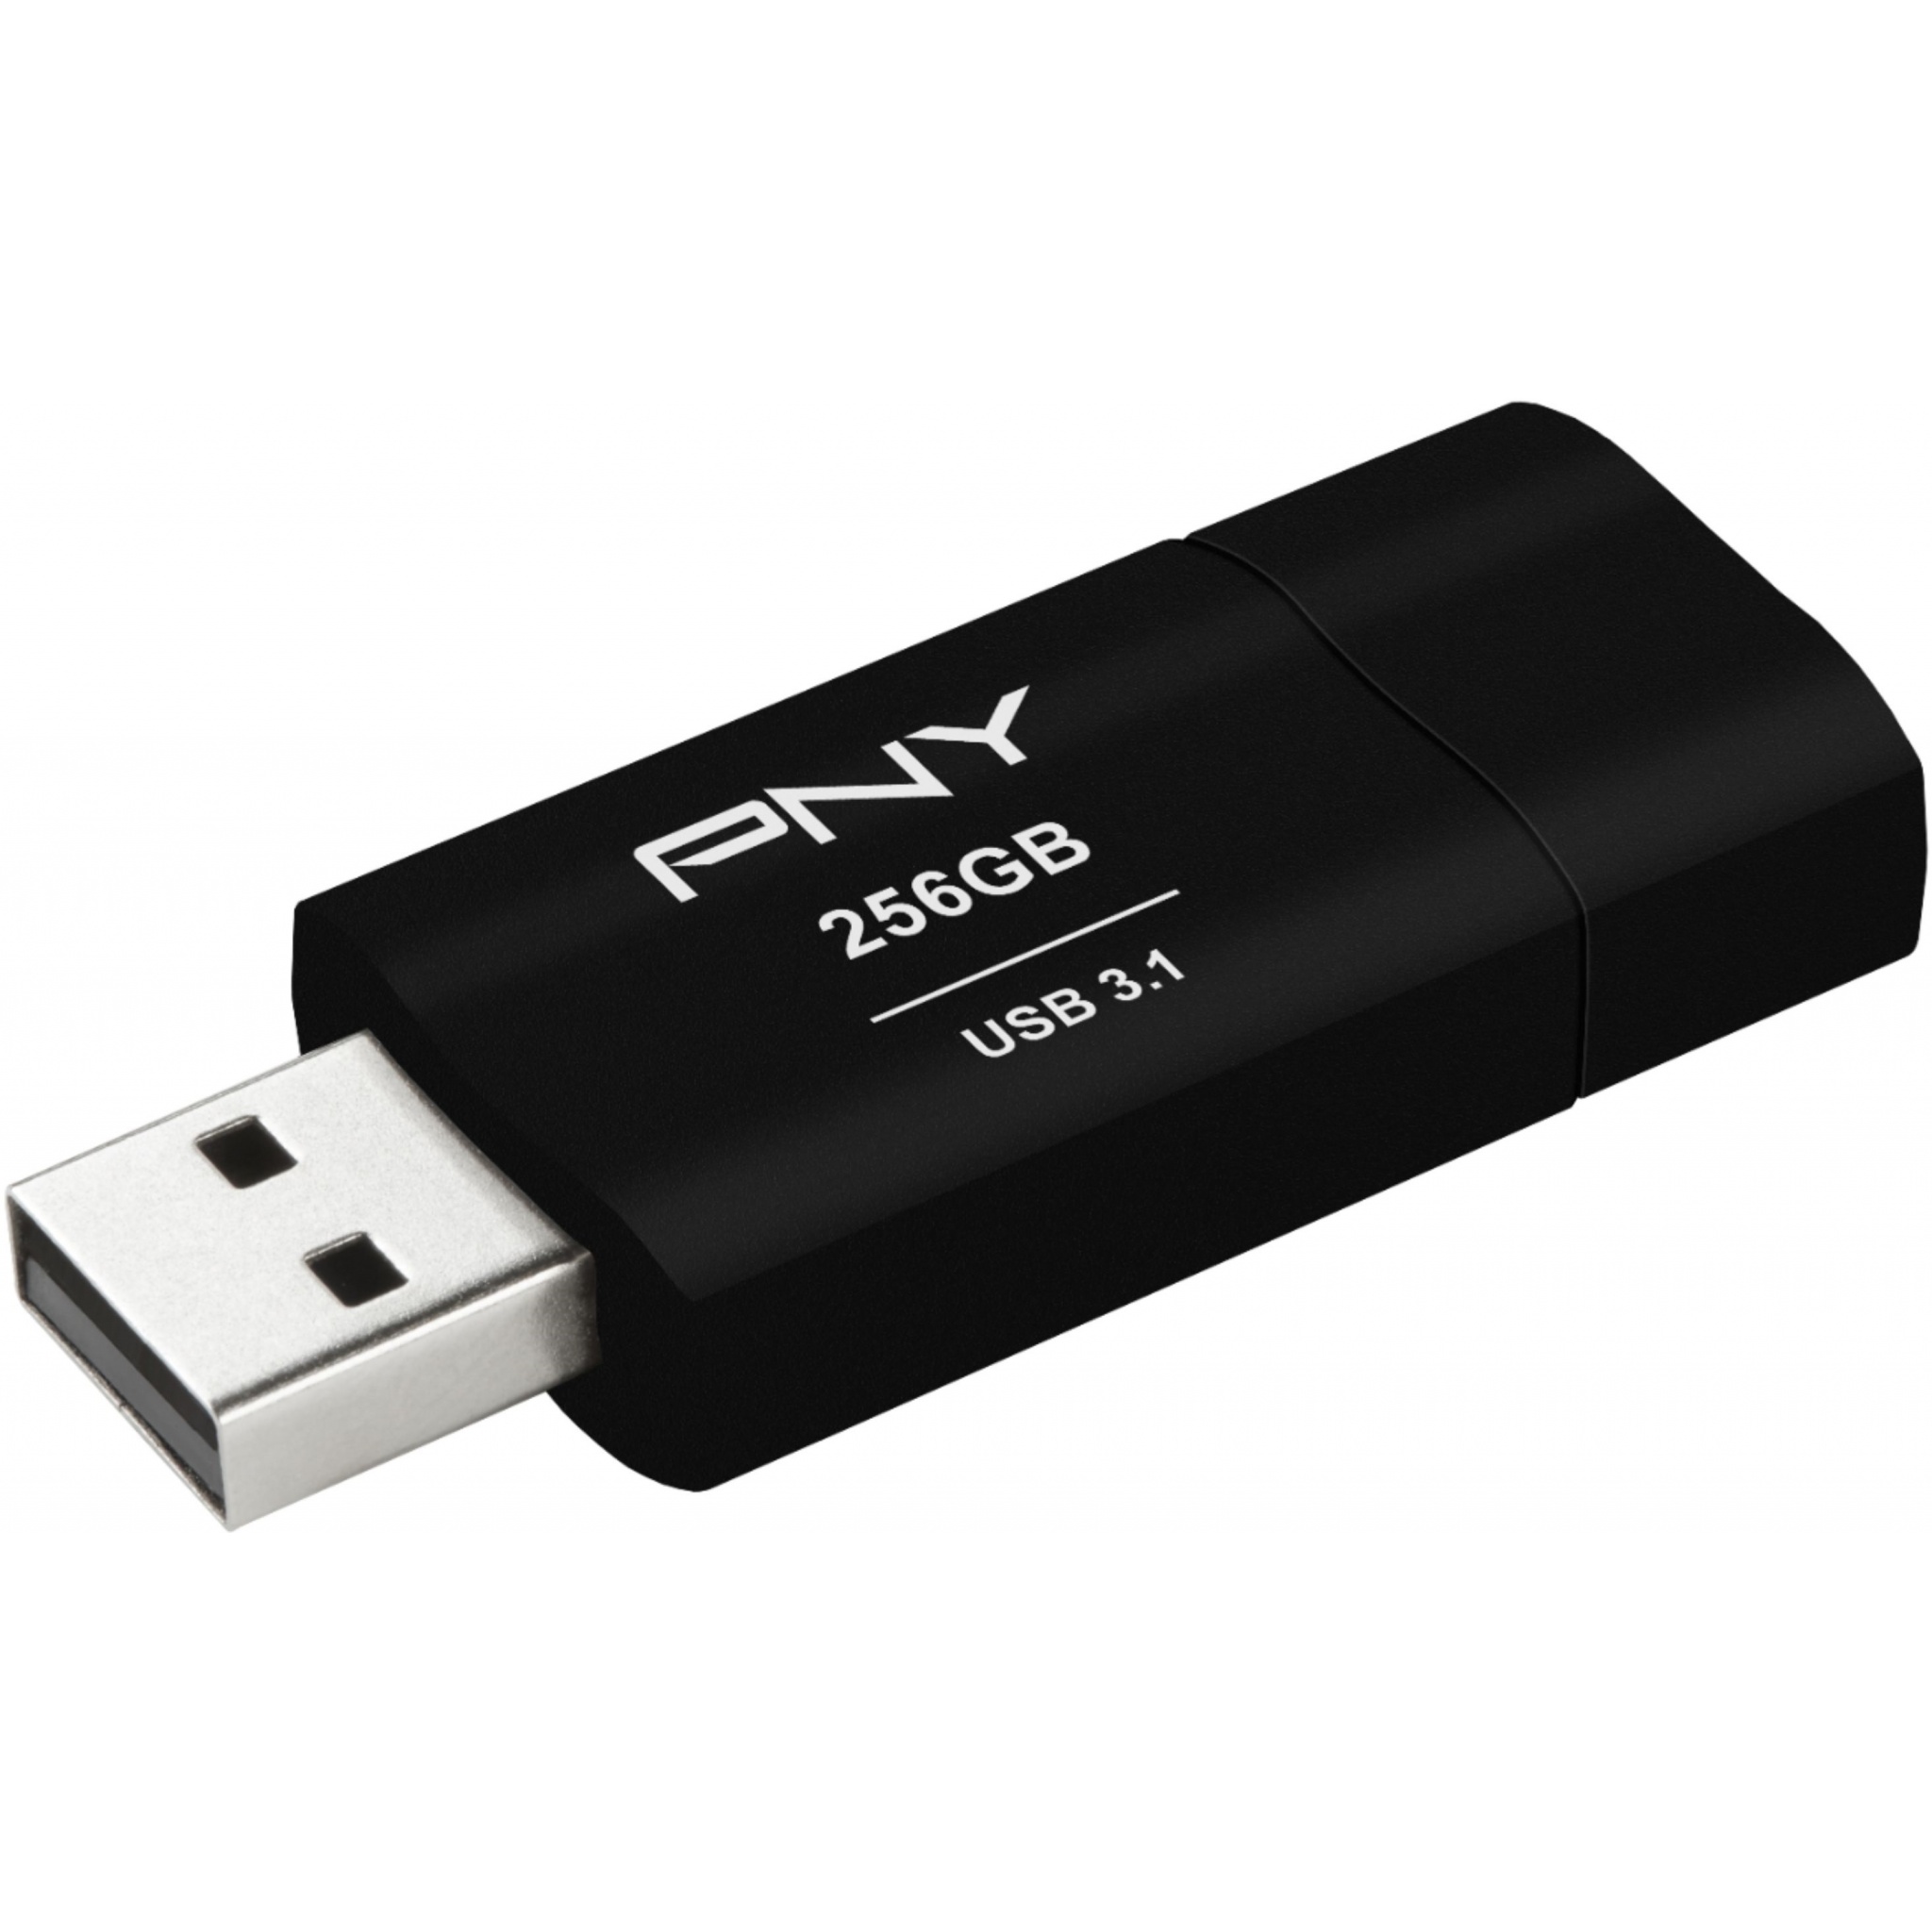 pny 256gb flash drive review